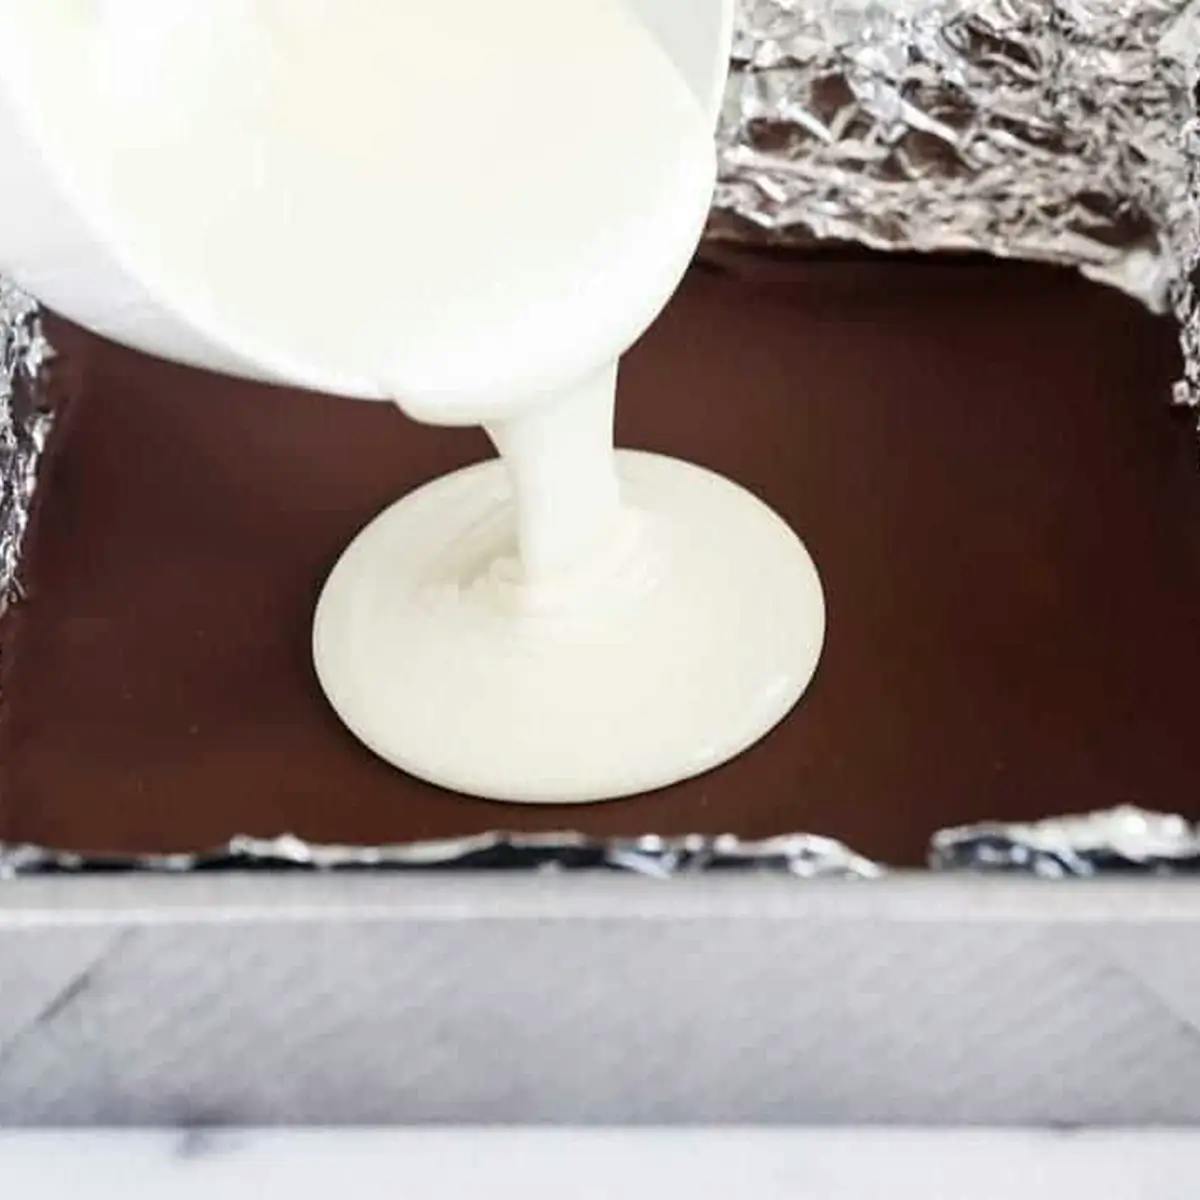 White chocolate being poured over hardened dark chocolate to make peppermint bark.